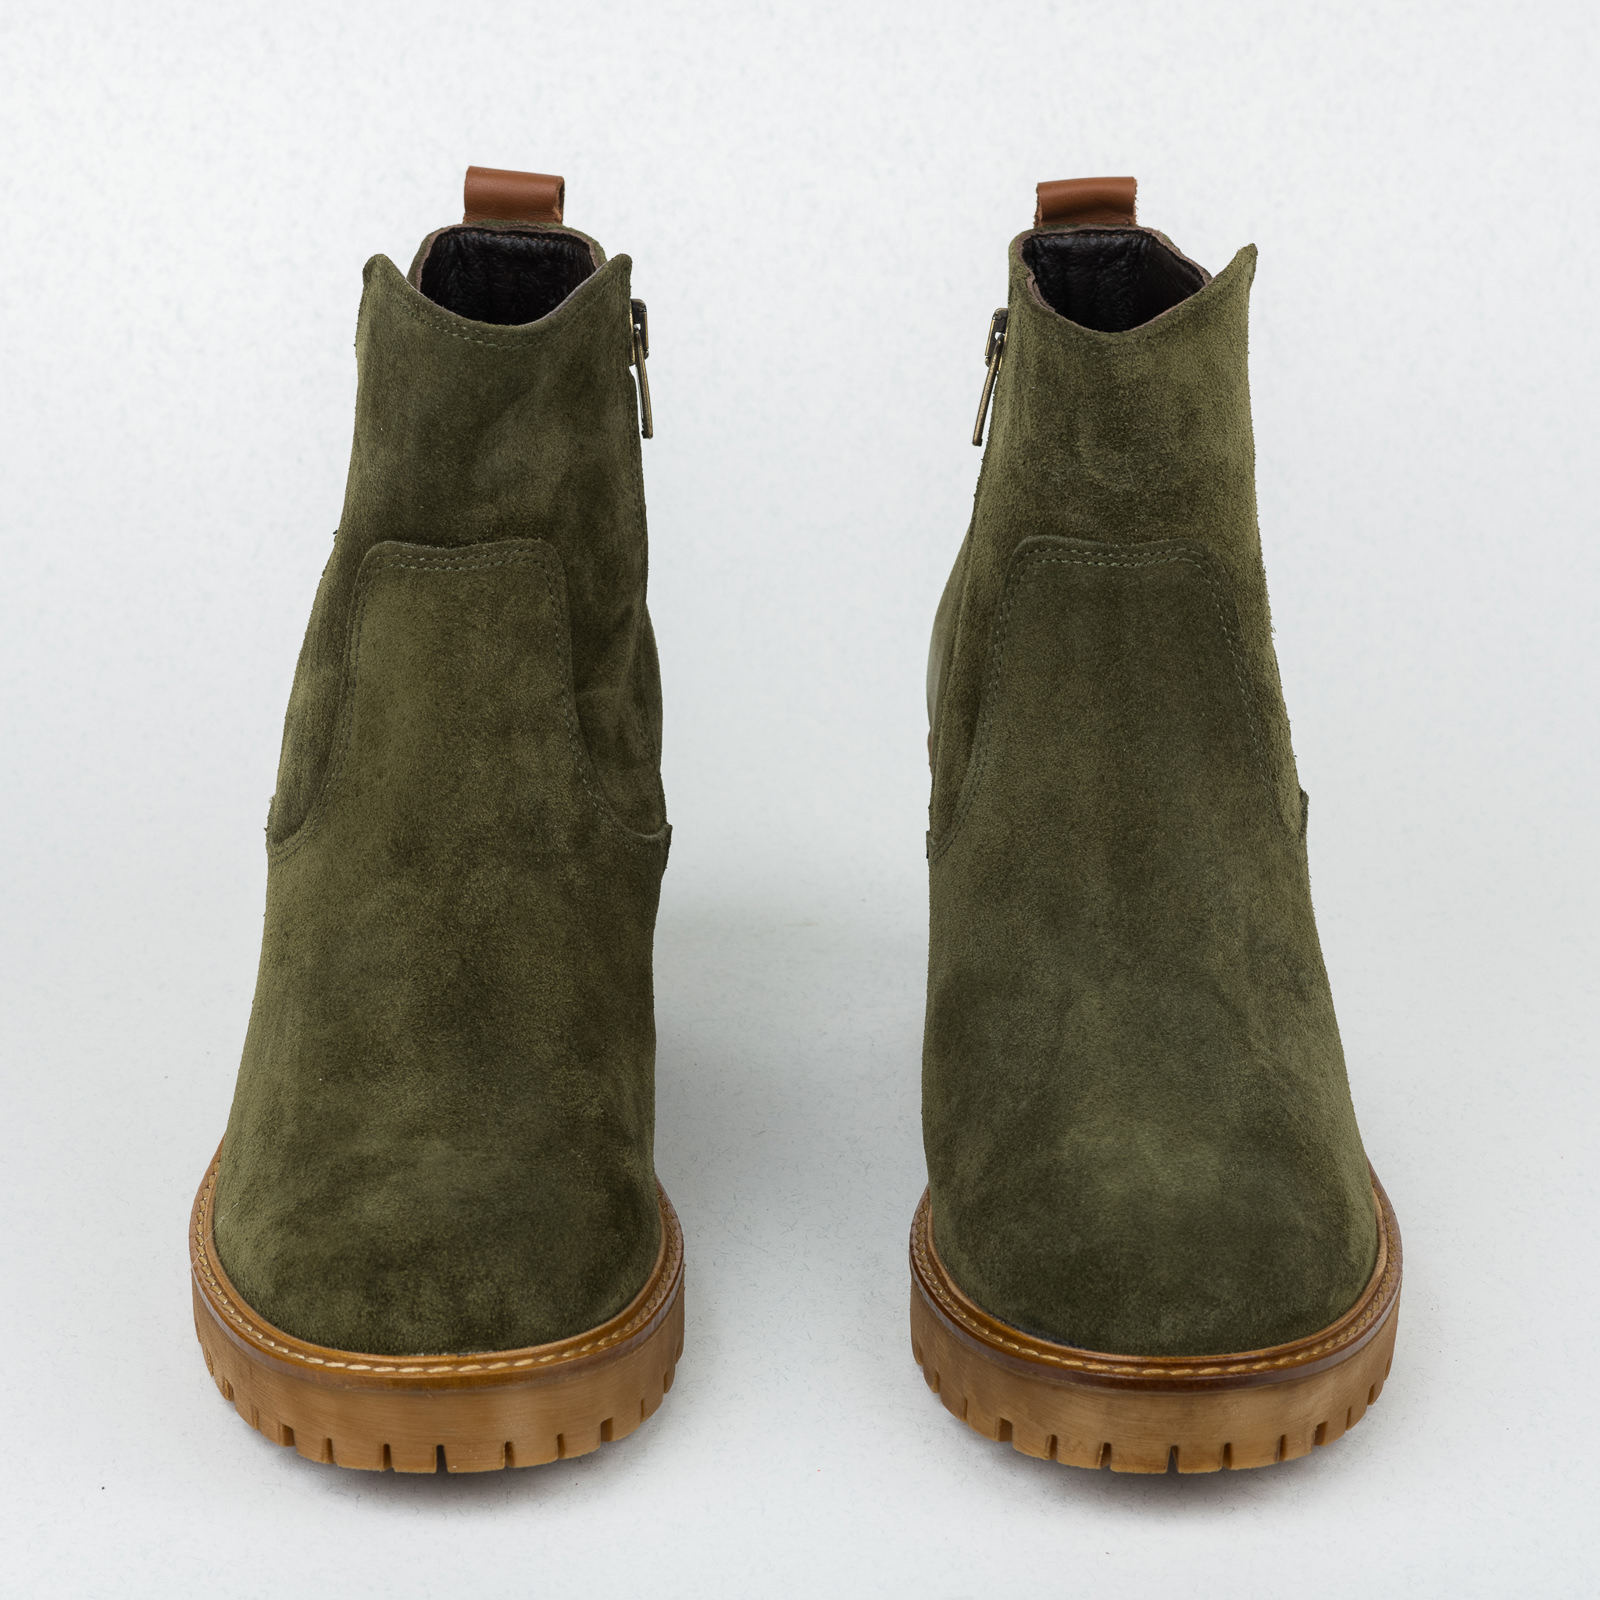 Leather ankle boots B436 - DARK GREEN